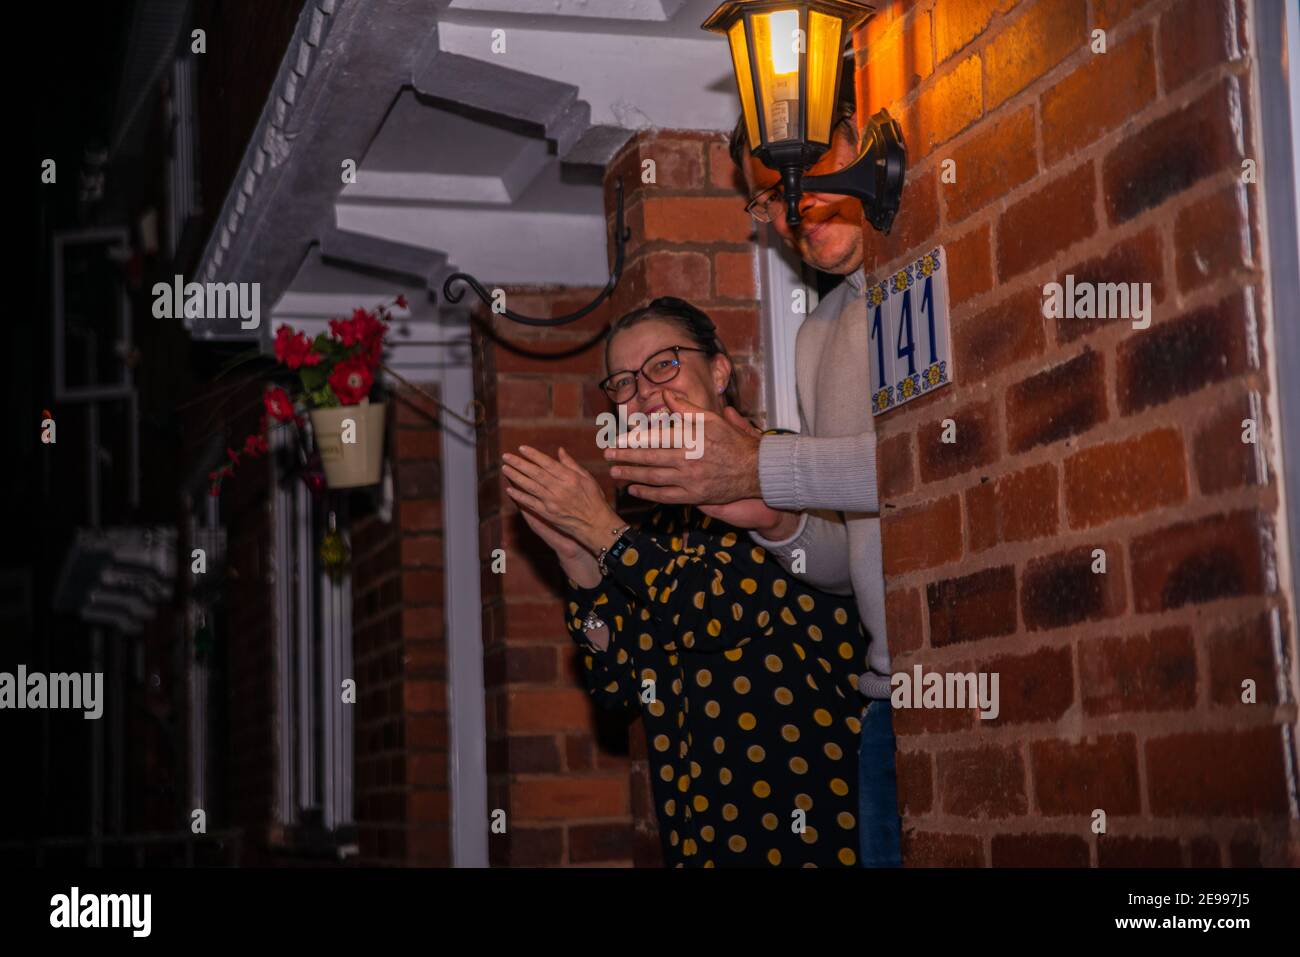 Birmingham, West Midlands, UK. 3rd February 2021: A couple come out of their house to clap from their doorstep at 6PM, after Boris Johnson called for the nation to pay respects to Captain Tom Moore who passed away at the age of 100 on Tuesday, after a fight with Covid-19. Credit: Ryan Underwood / Alamy Live News Stock Photo